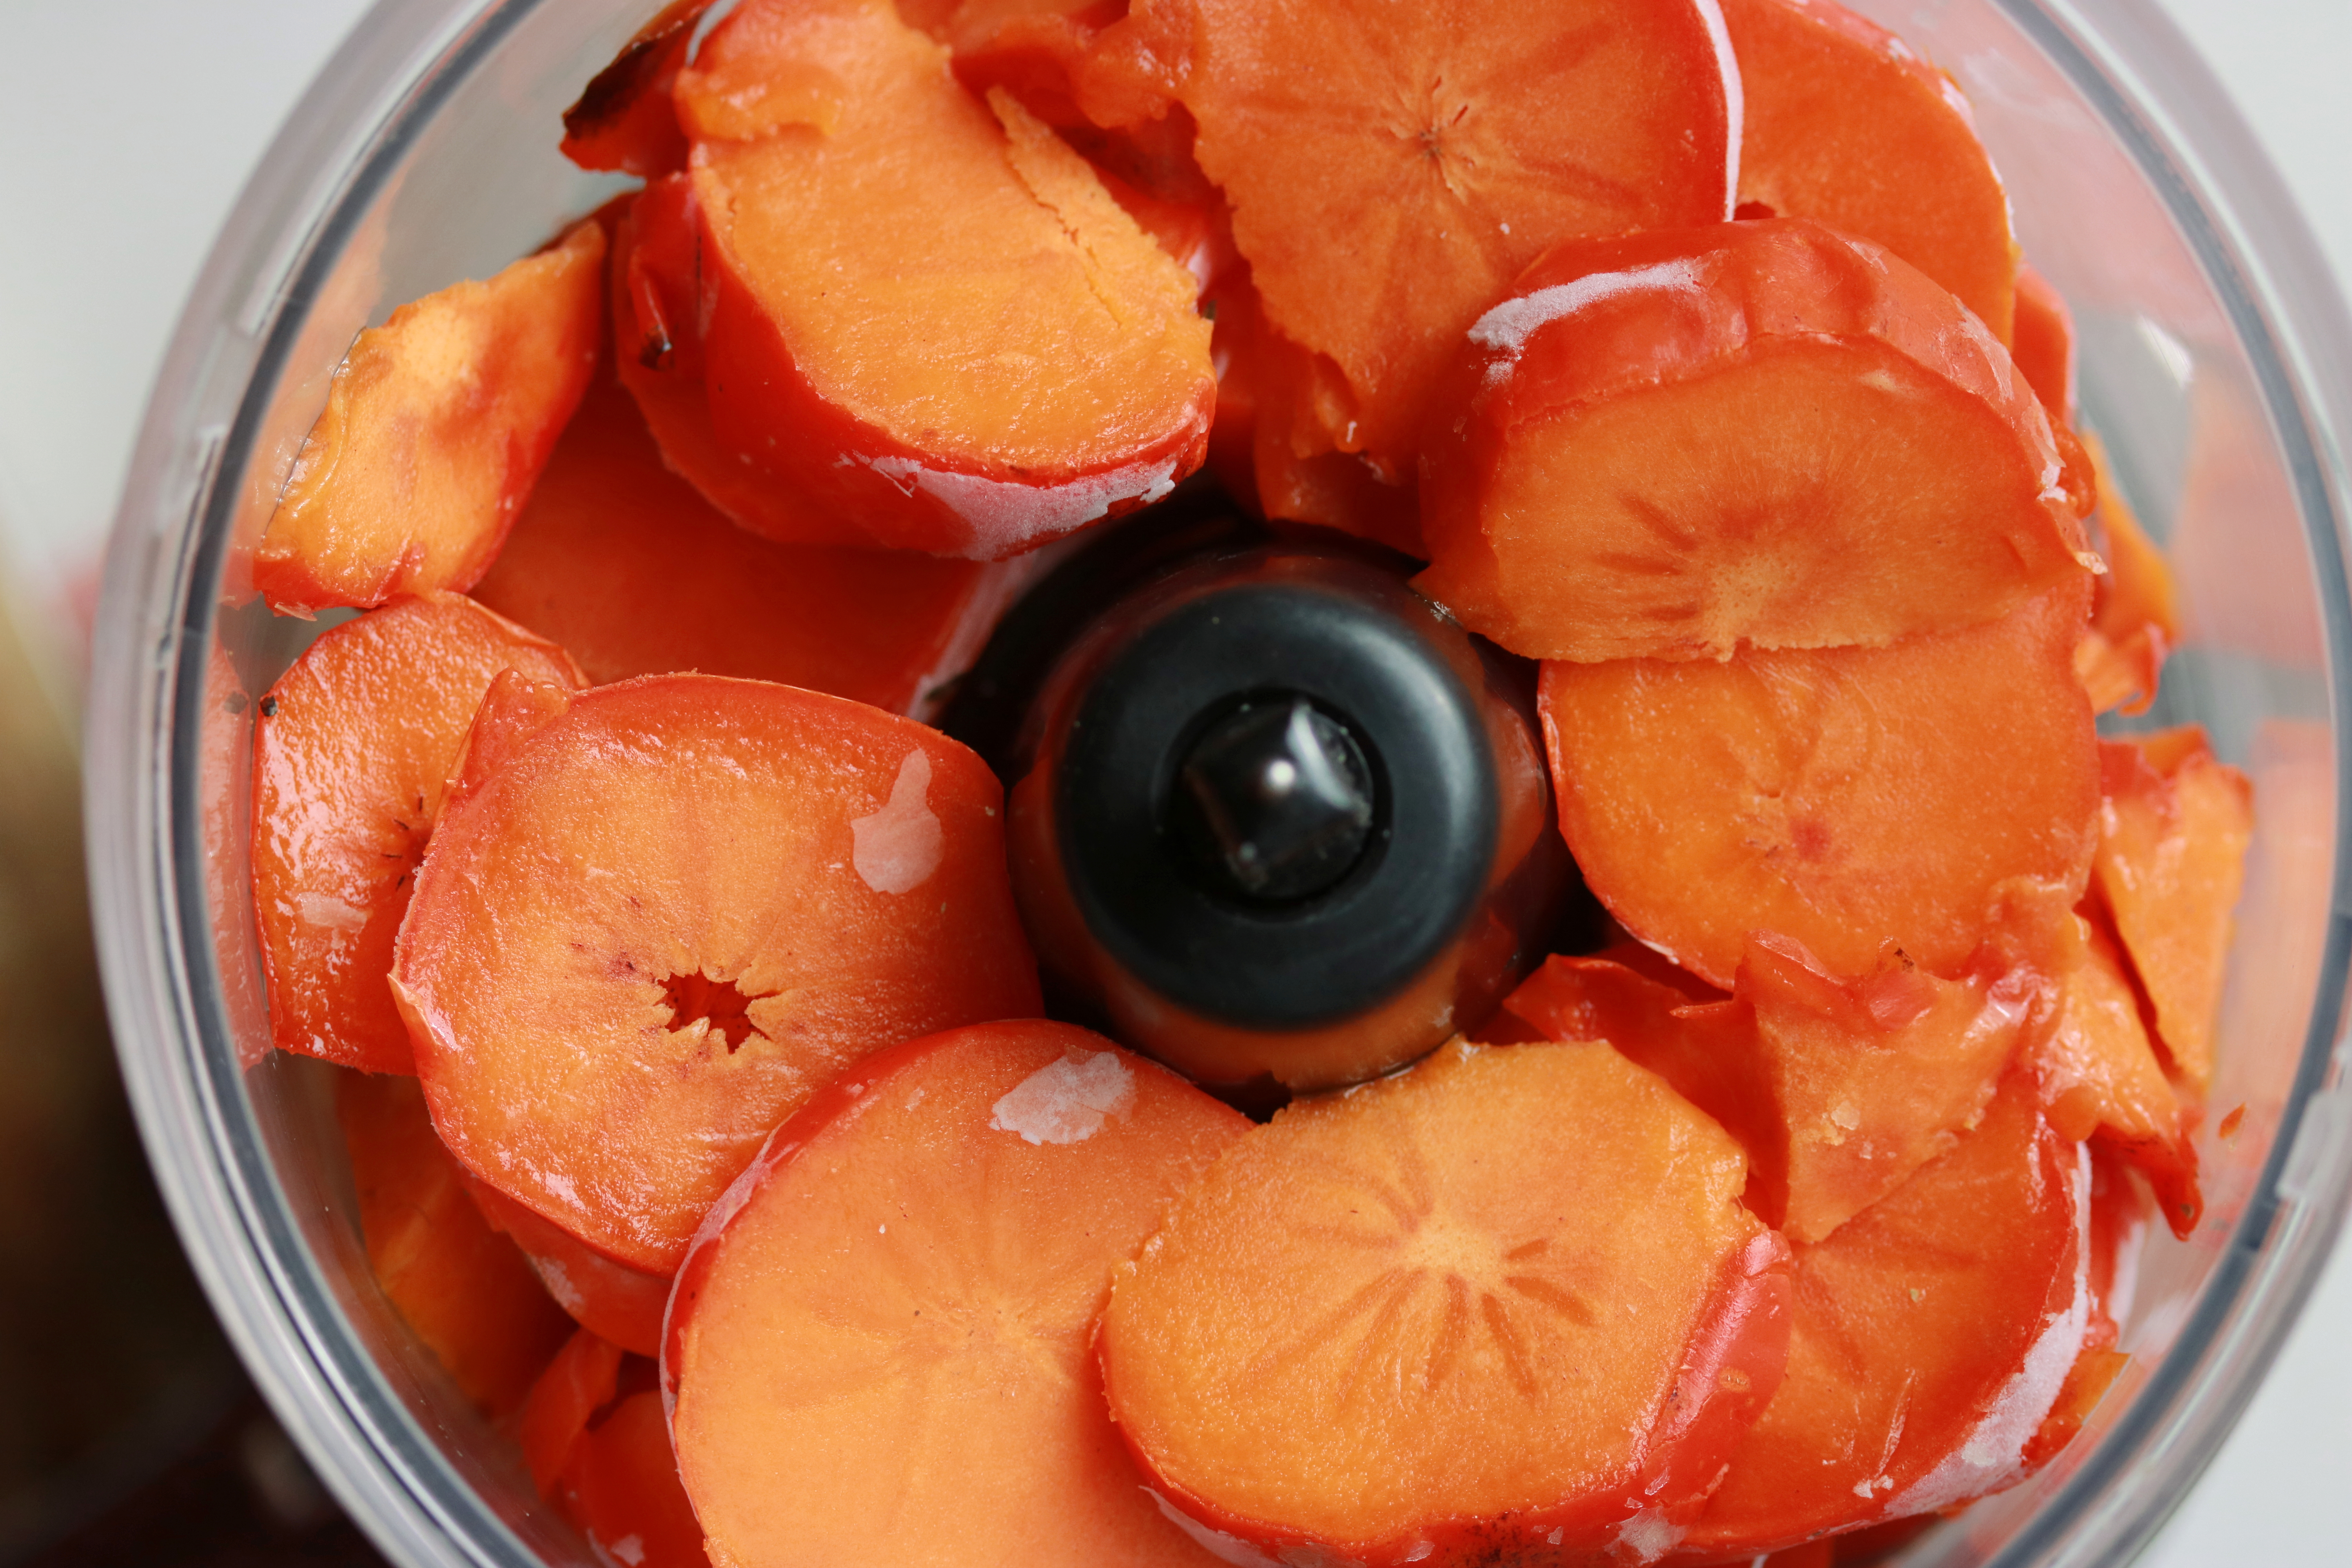 Check out these vibrant frozen persimmons. All you need are these and two other ingredients to make healthy, delicious vegan sorbet. It seriously tastes like pumpkin pie and is so easy to whip up!